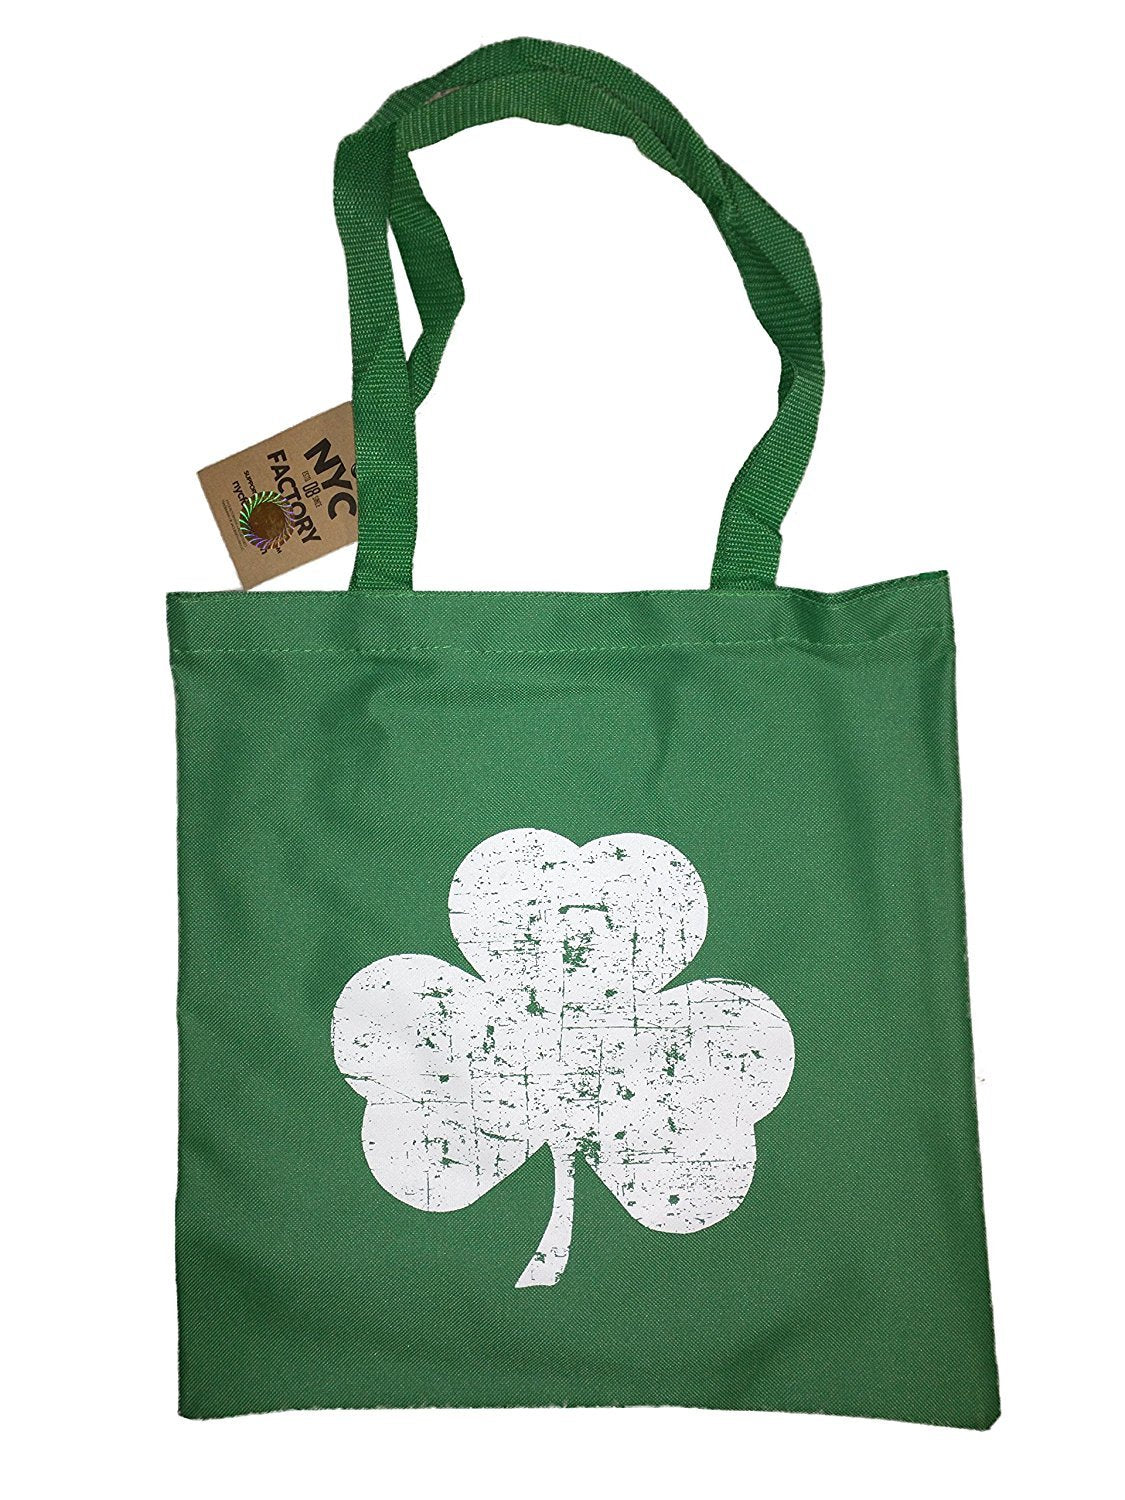 Shamrock Tote Bag Recycled Material (Distressed Design, Kelly Green)